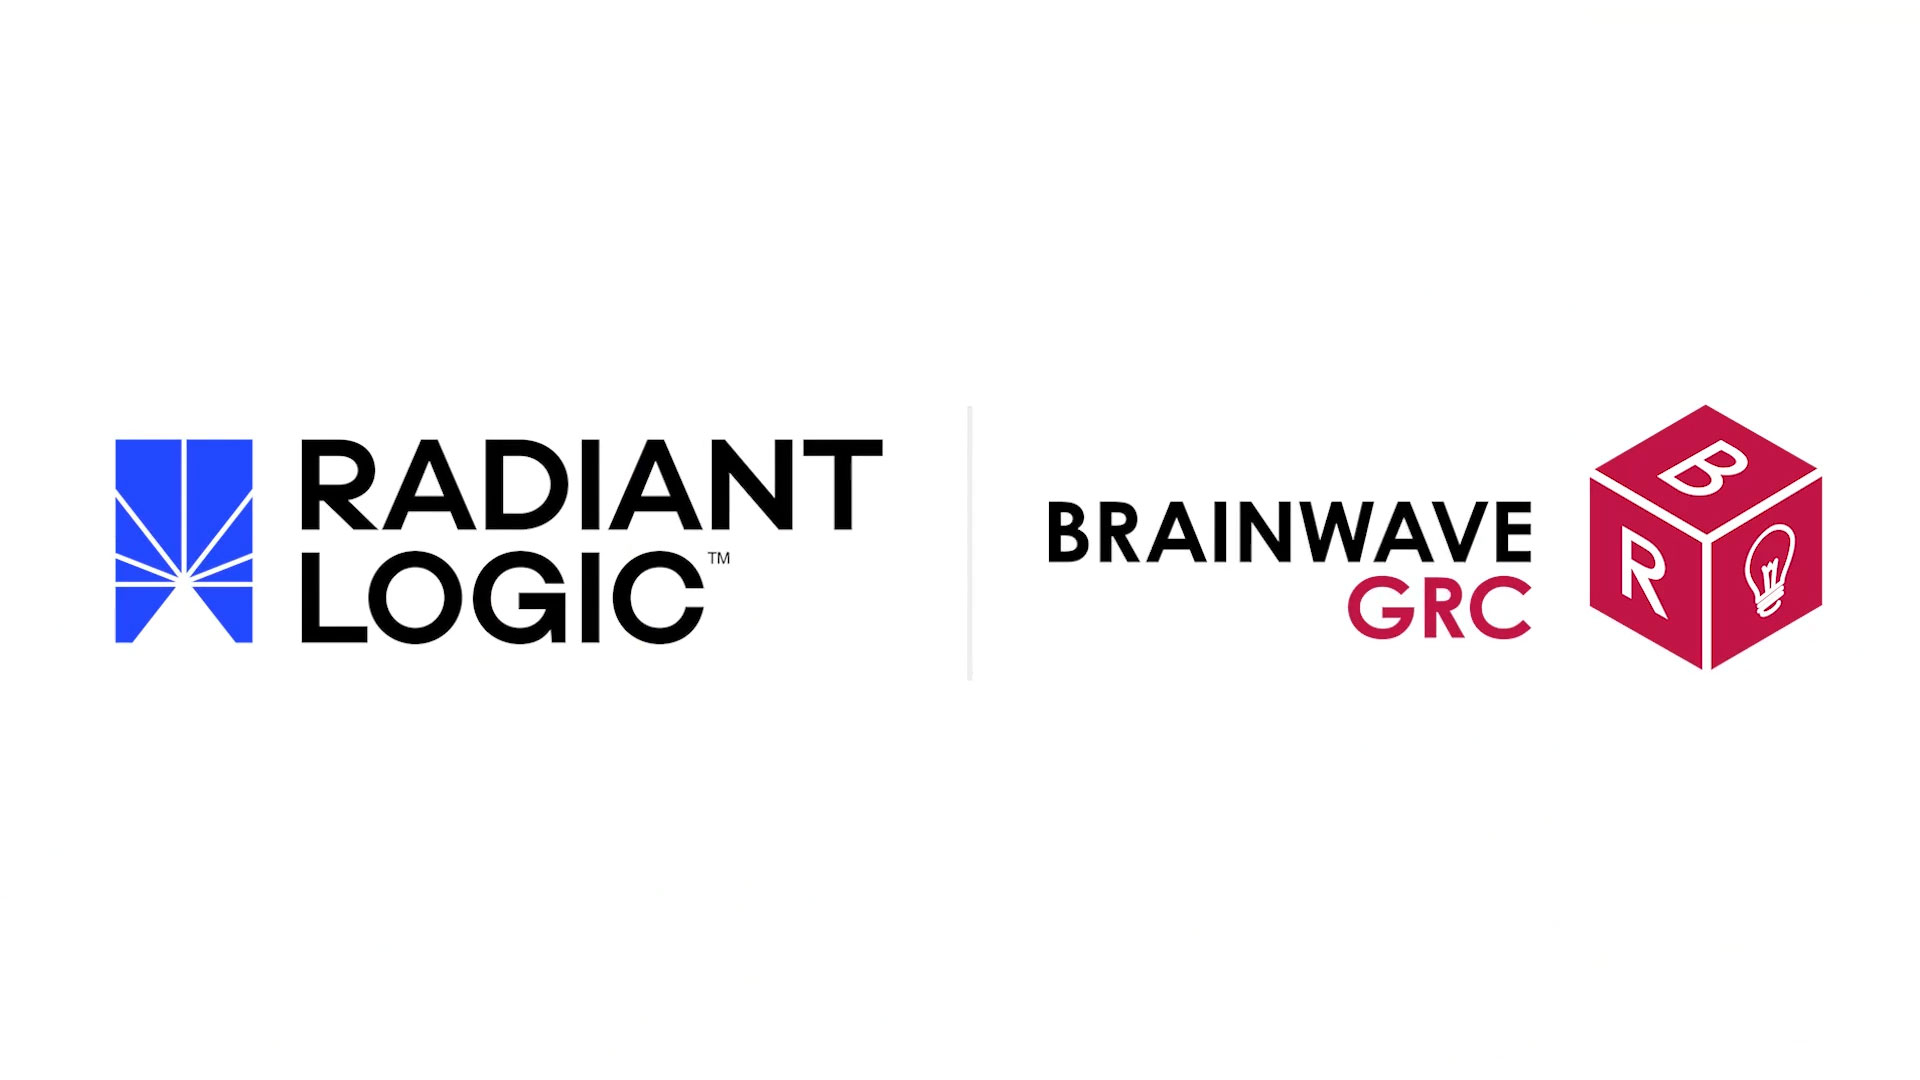 Radiant Logic signs definitive agreement to acquire identity analytics leader Brainwave GRC.